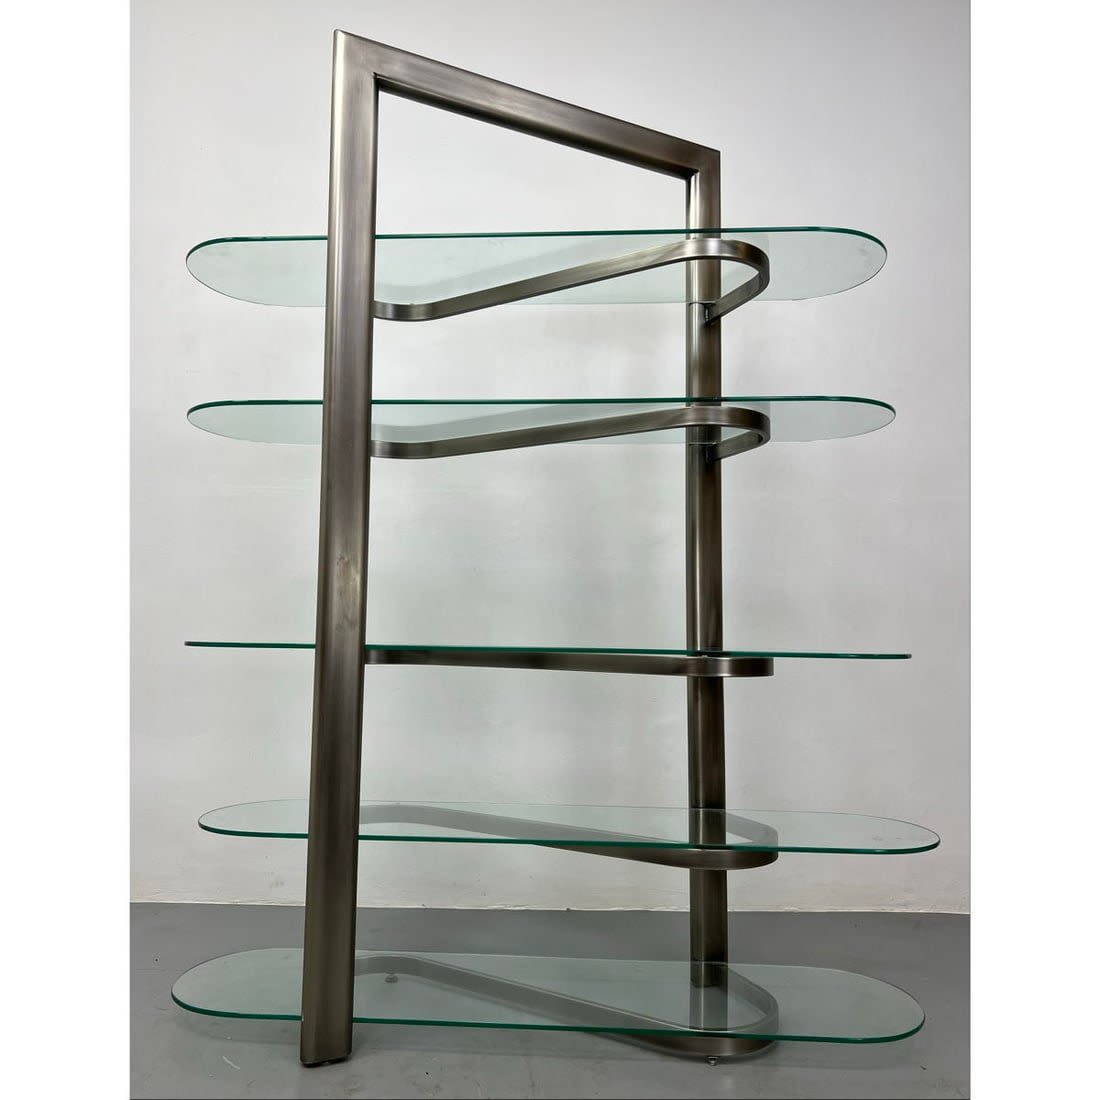 Modernist Stainless Etagere Display 362c35